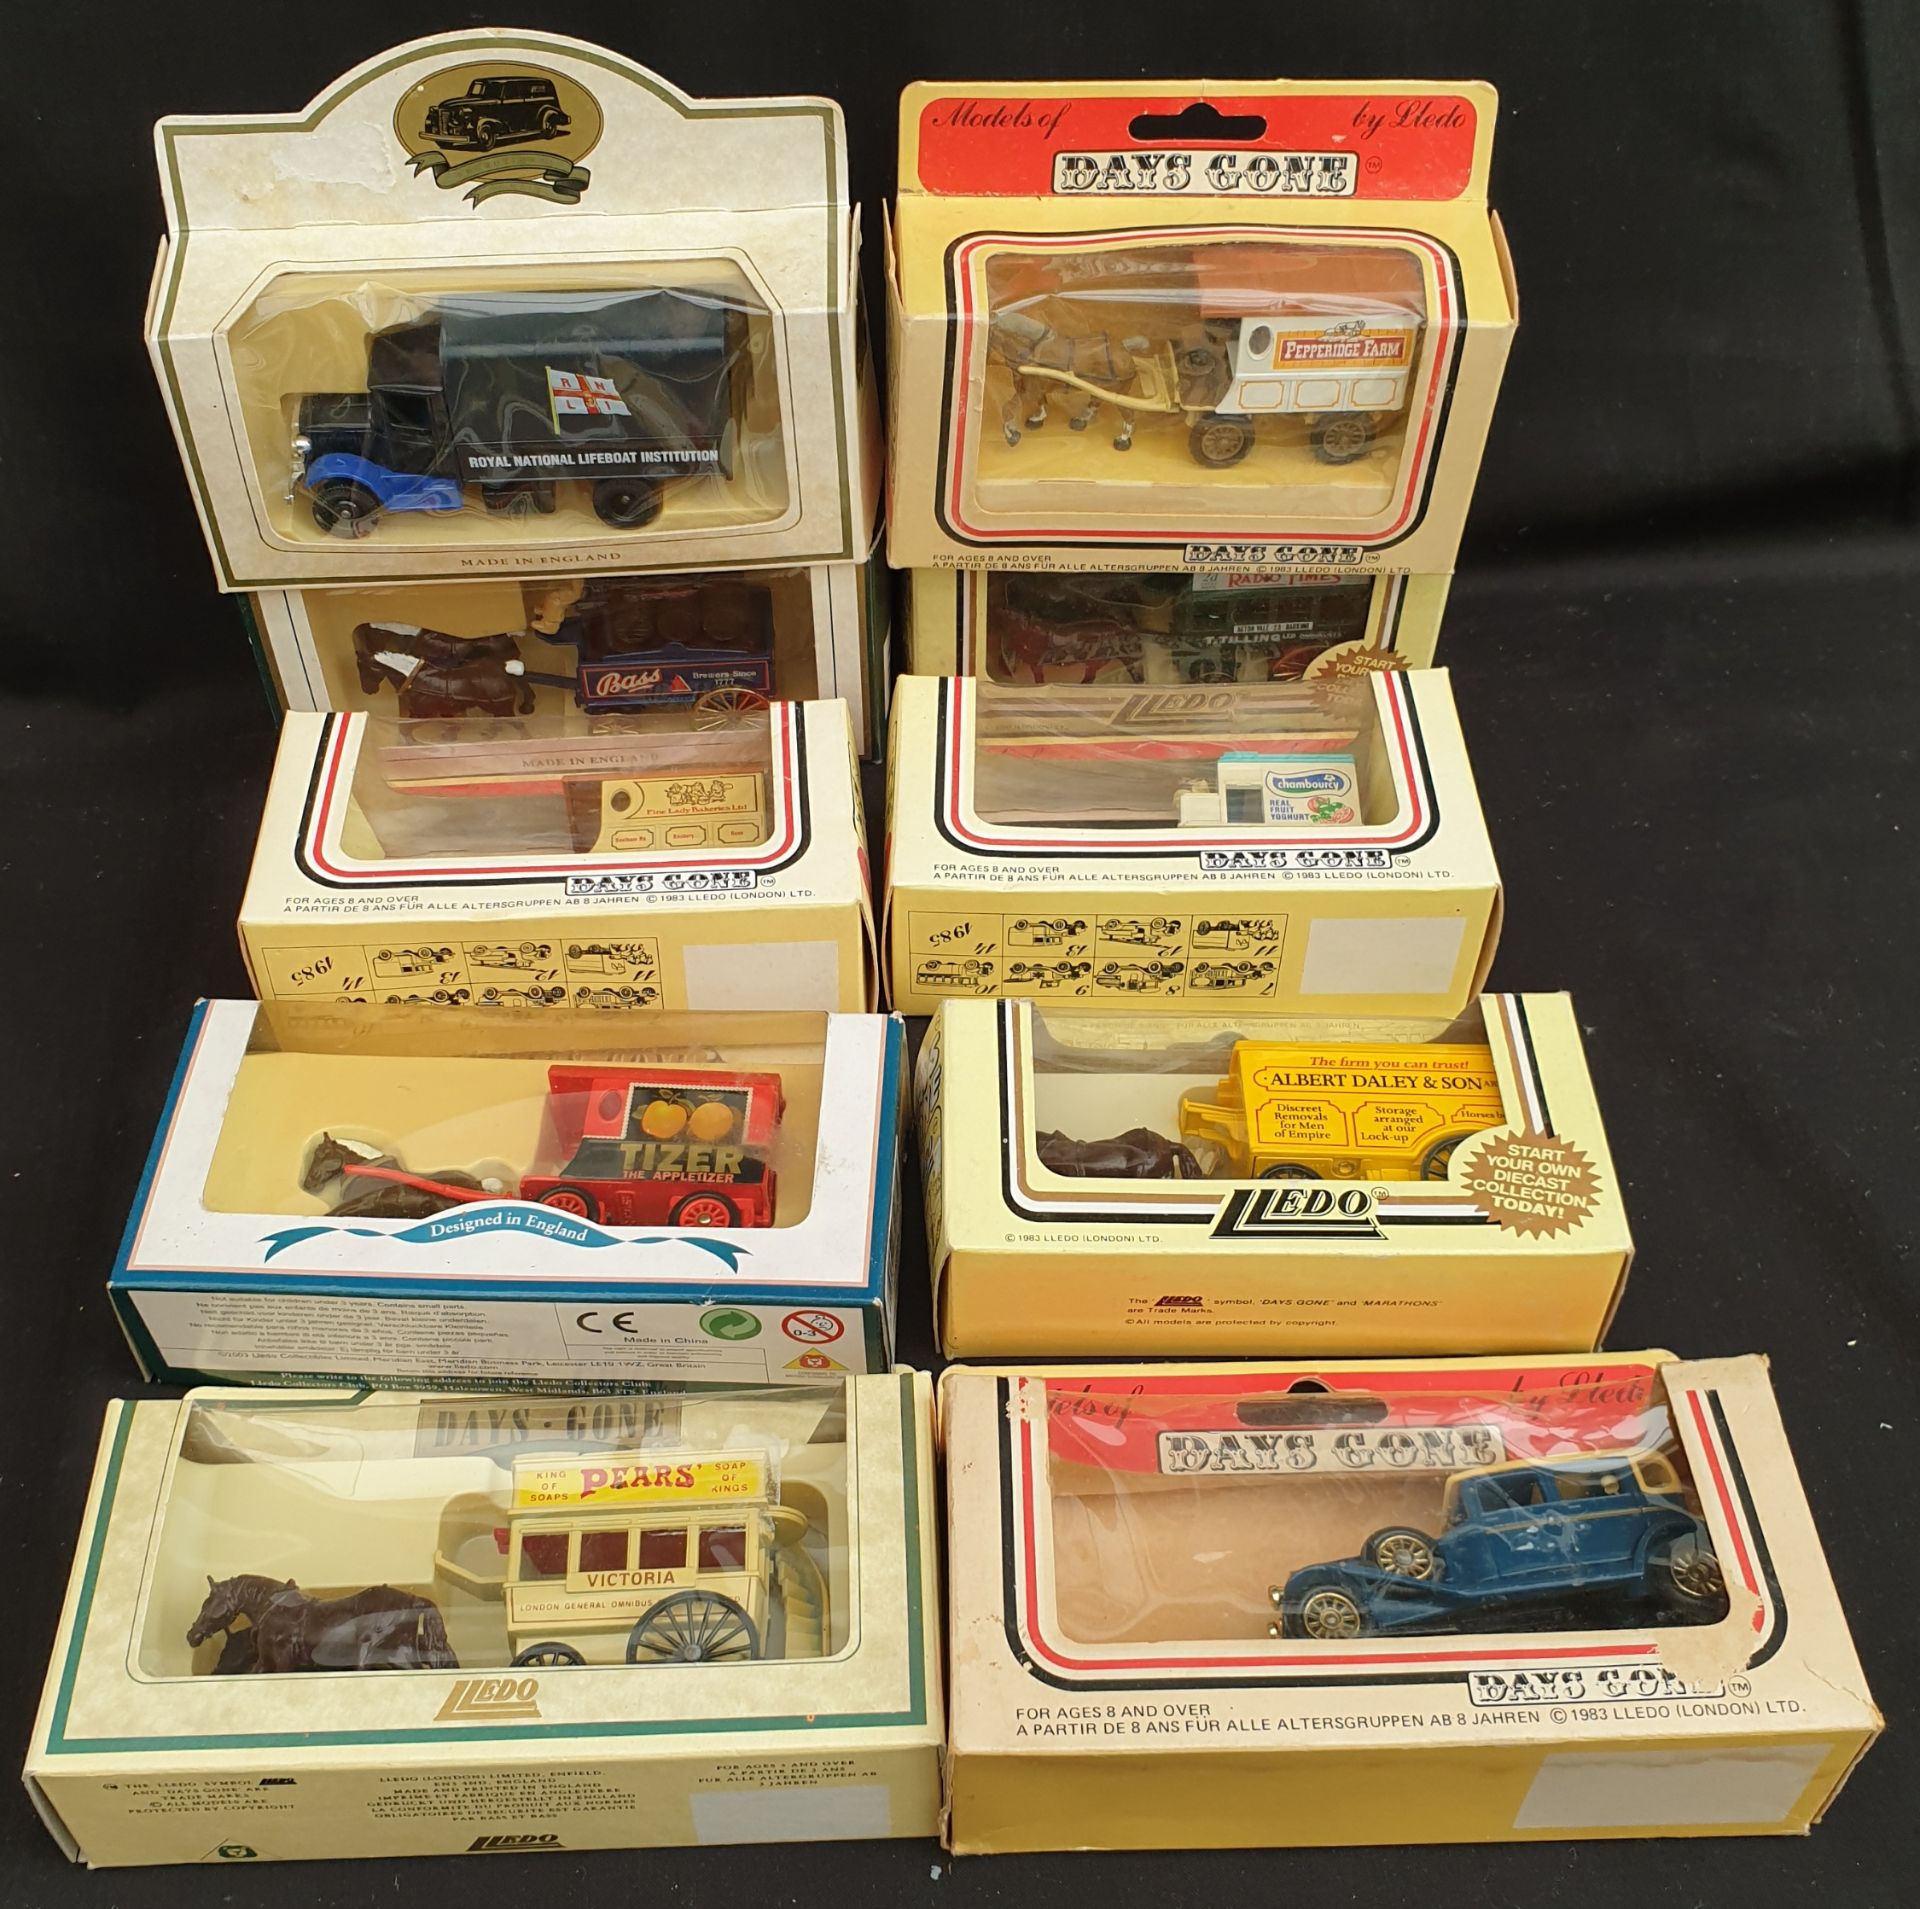 Collectable 10 x Die Cast Model Cars Lledo & Days Gone